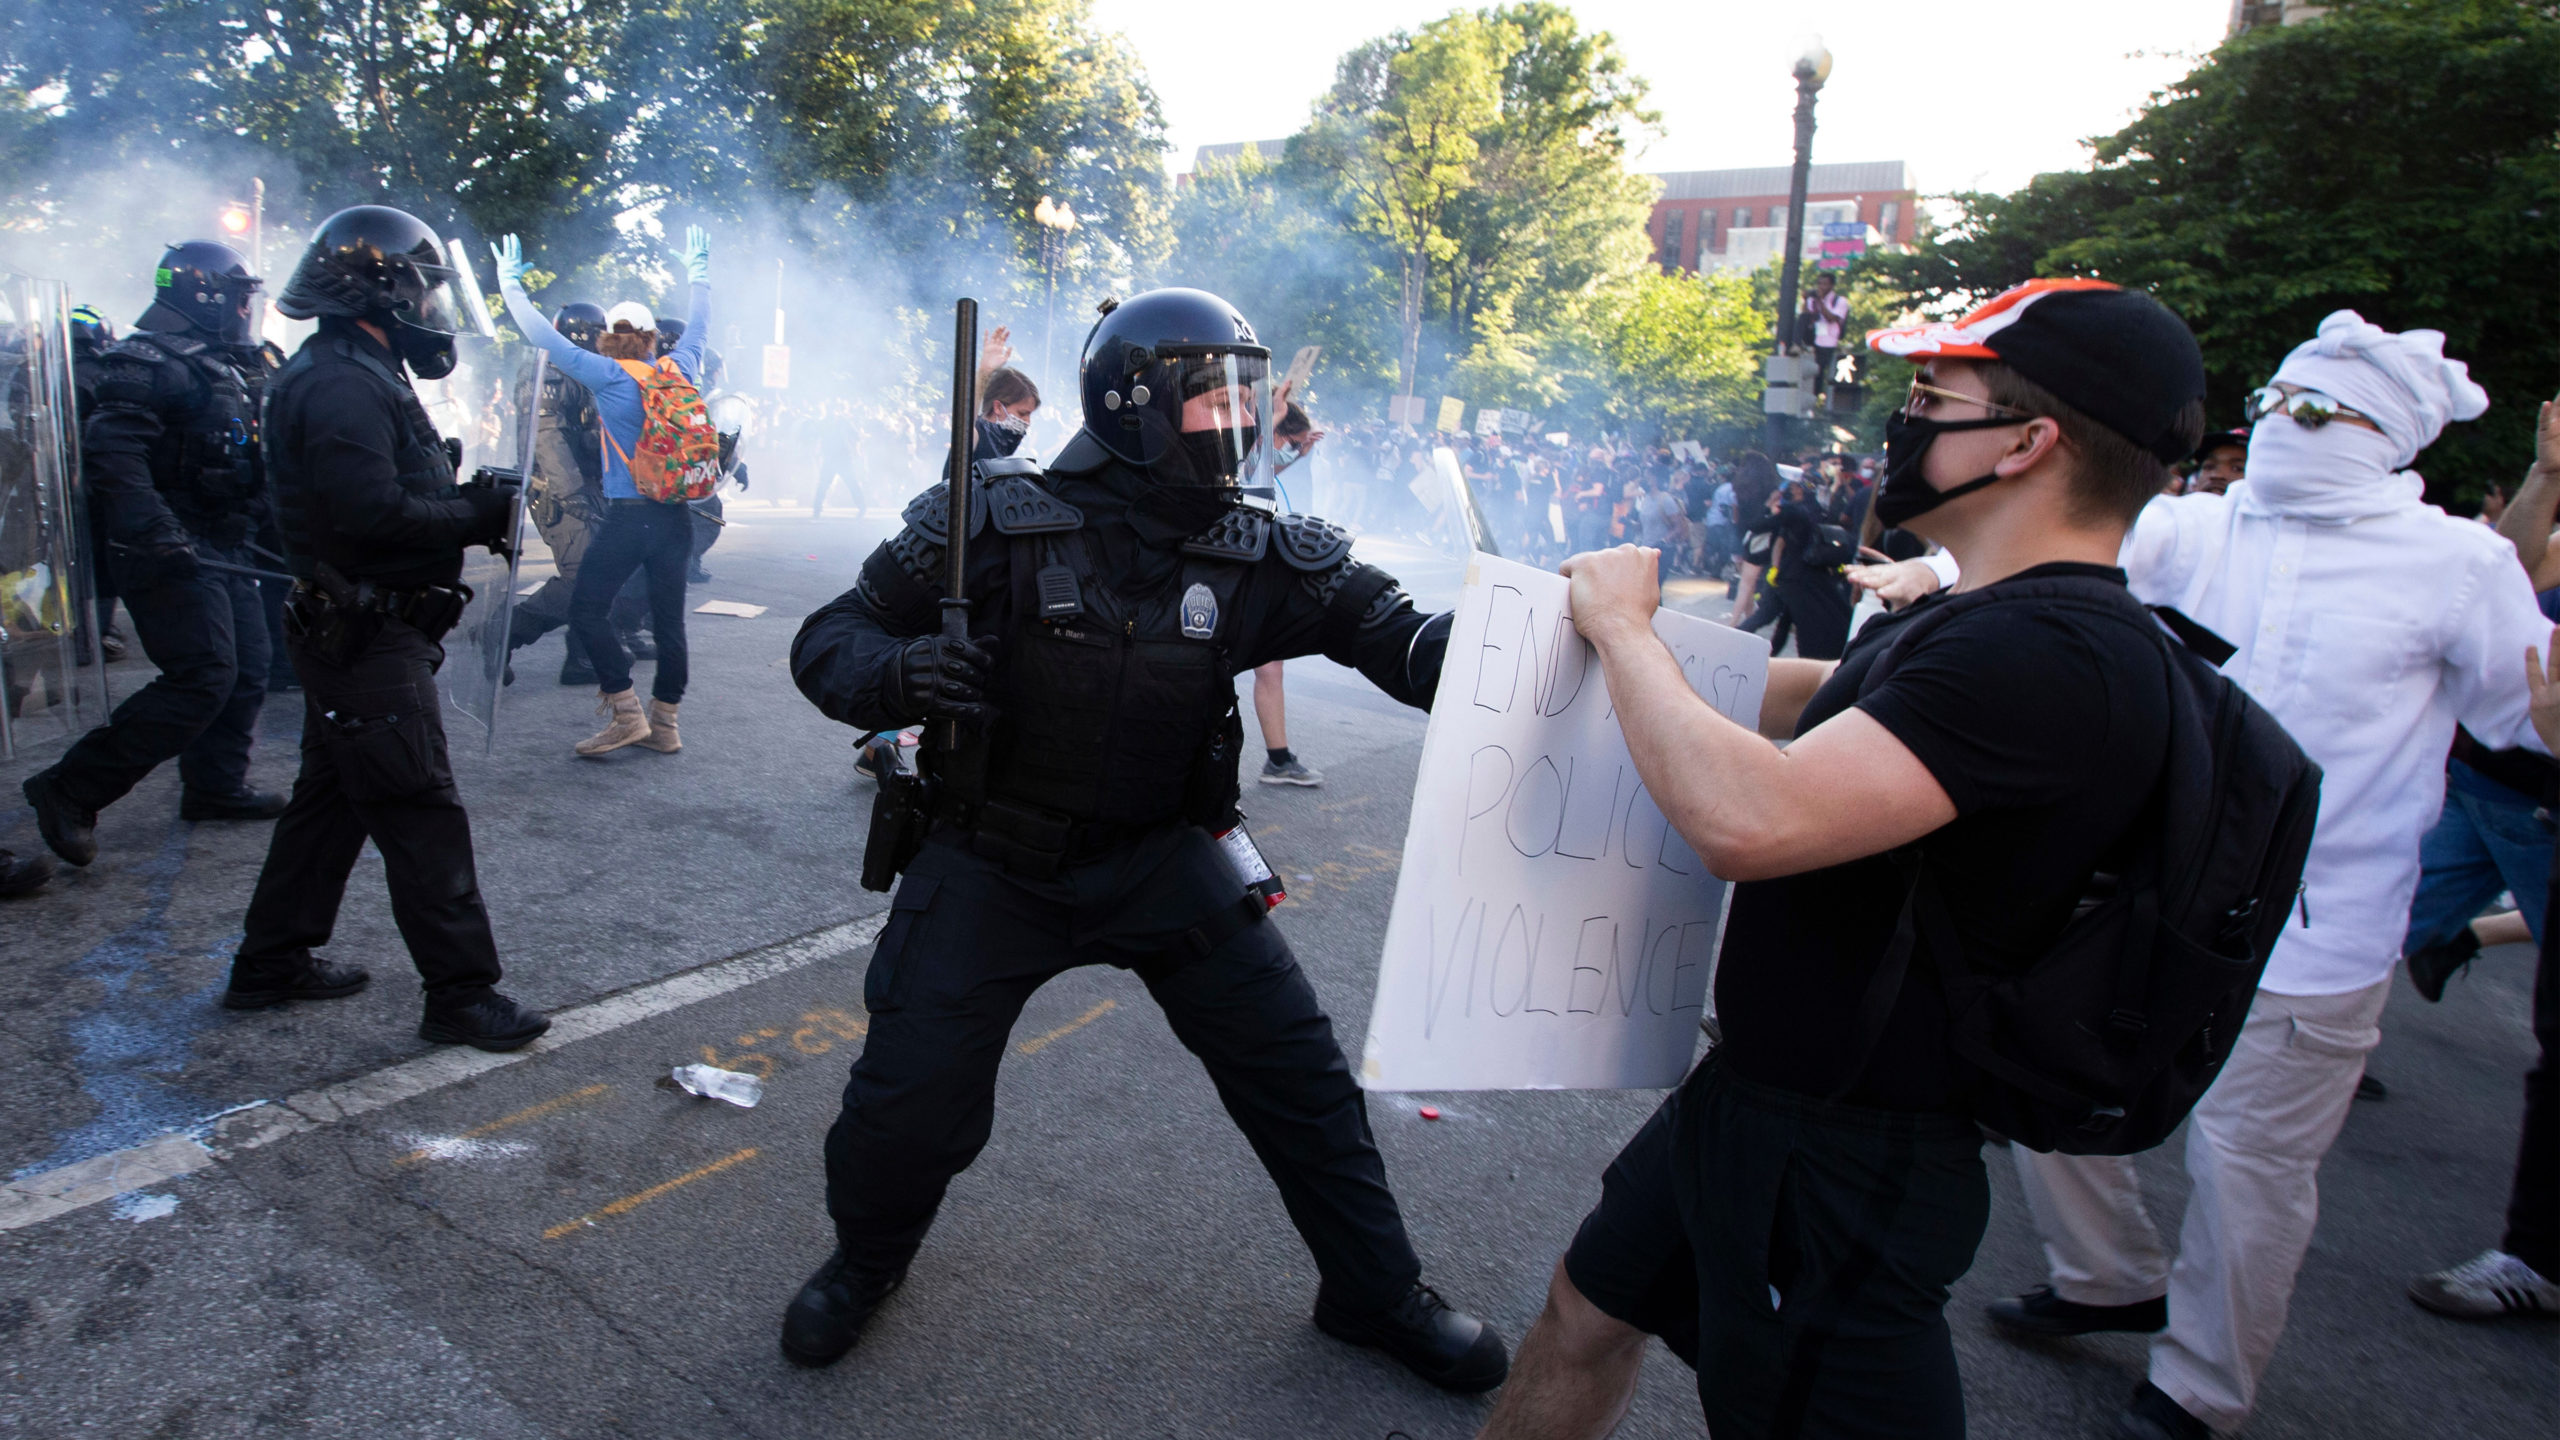 Police attacking protesters near the White House on June 1, 2020. (Photo: Jose Luis Magana, AFP via Getty Images)